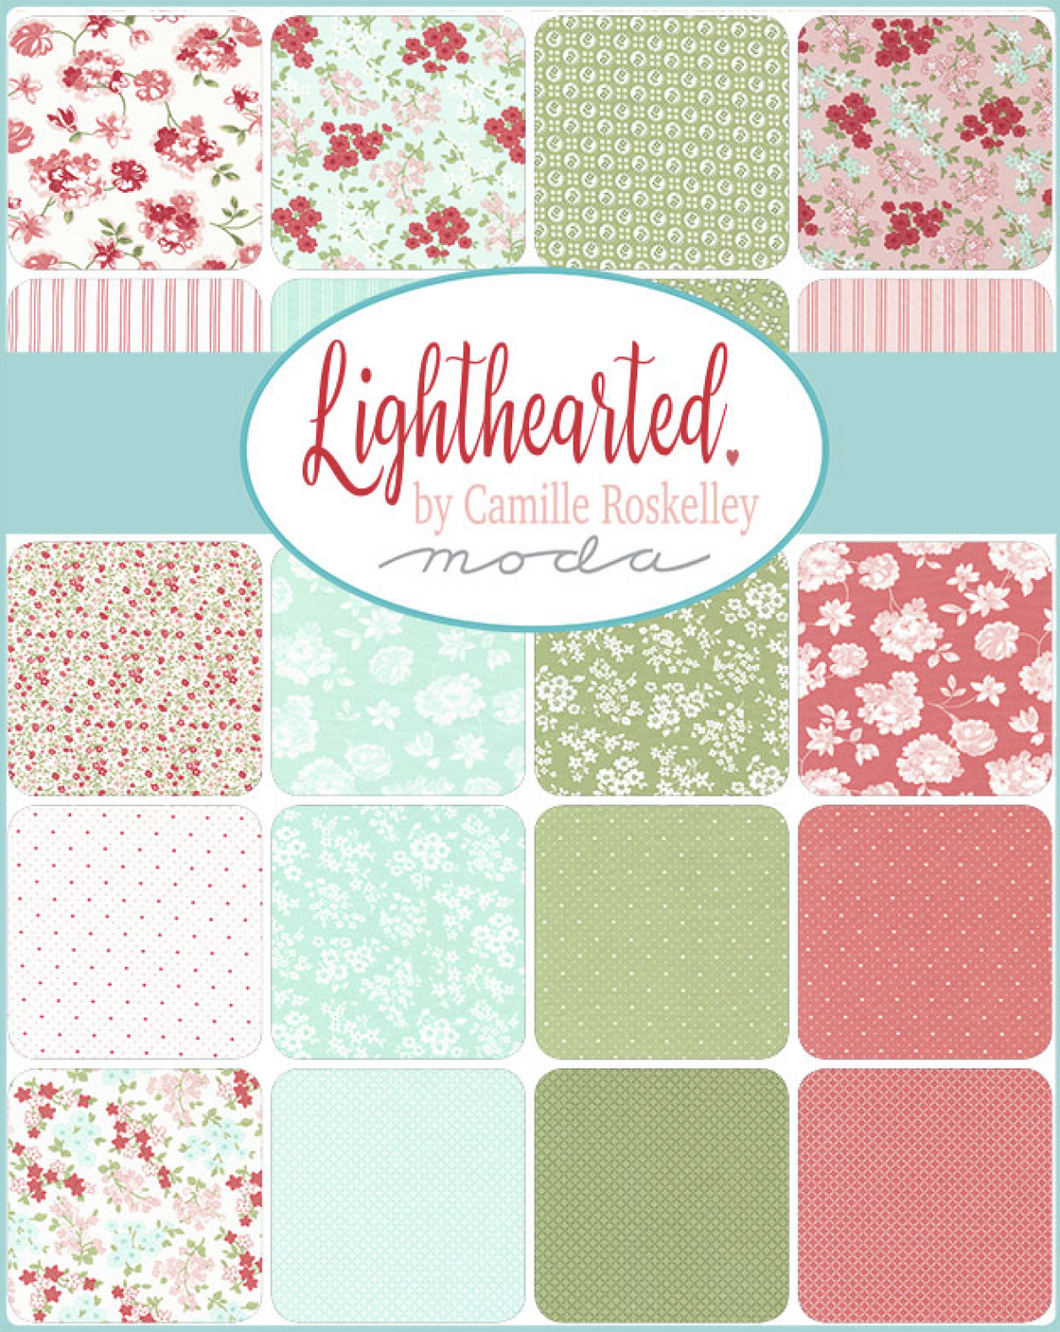 Lighthearted CHARM PACK by Camille Roskelley for Moda Fabrics